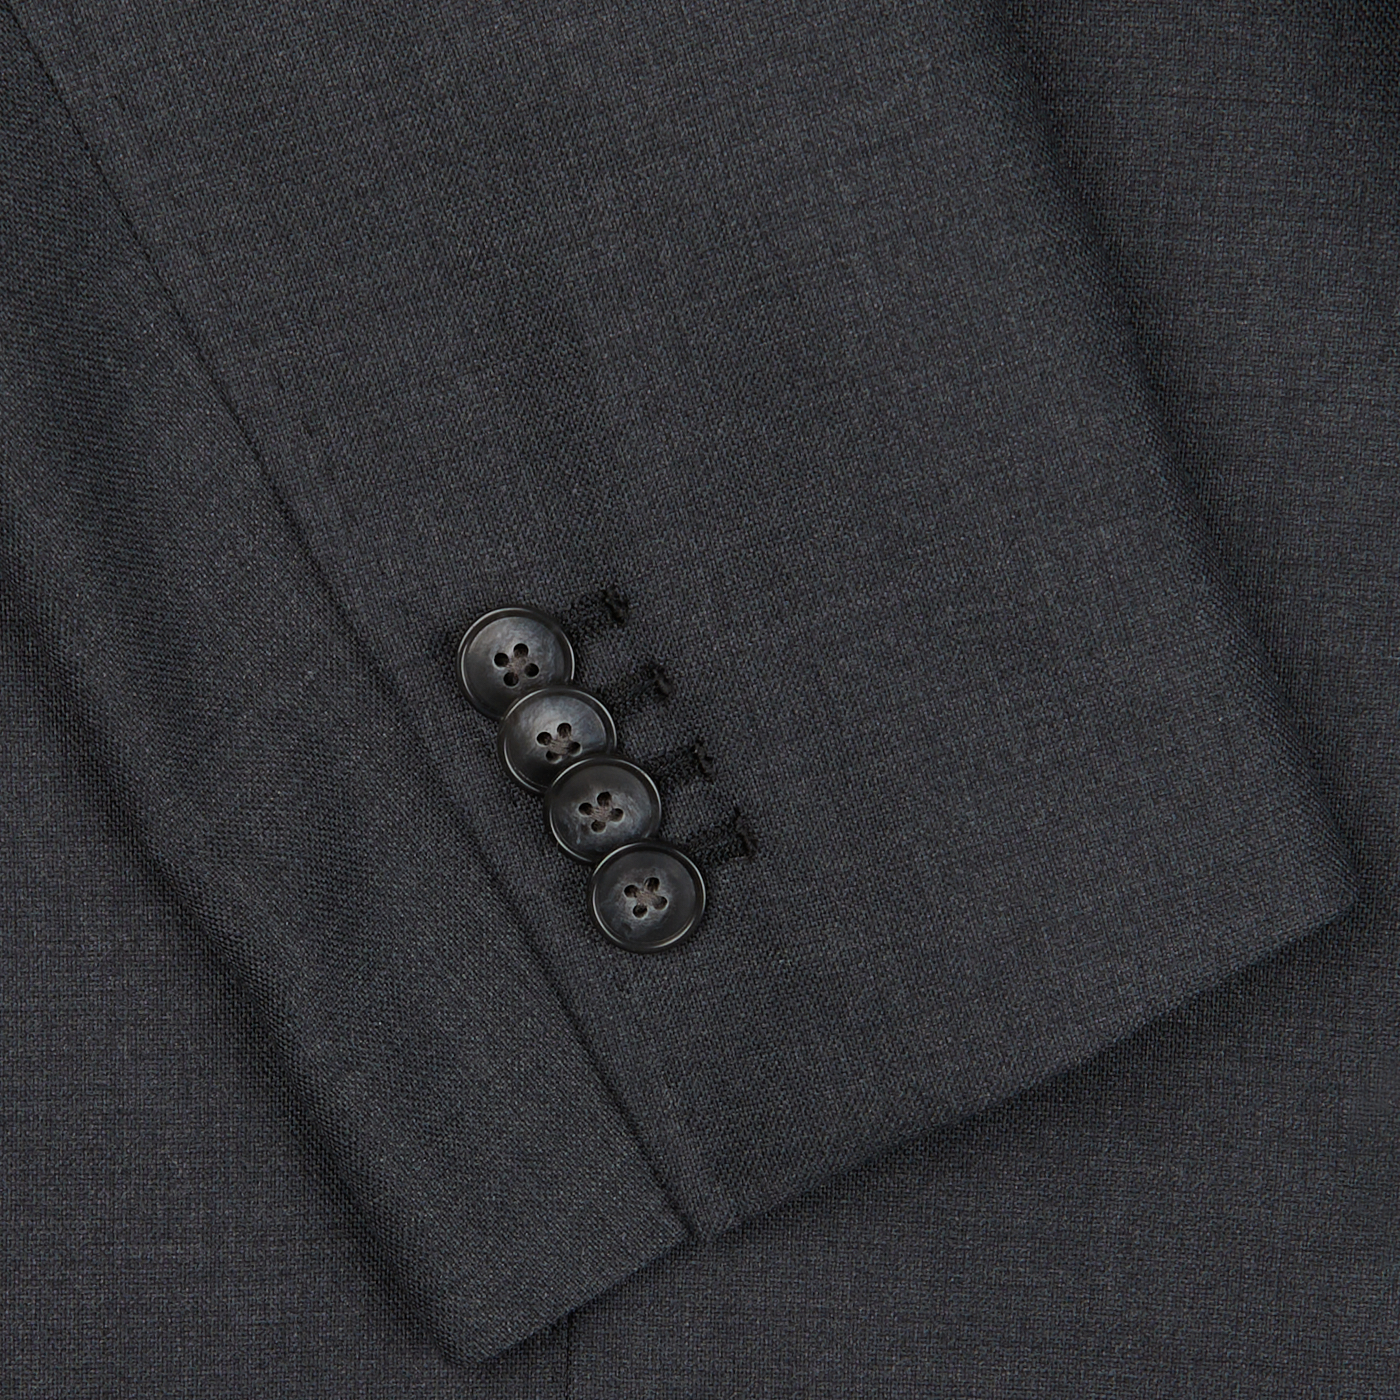 Close-up of a Baltzar Sartorial Grey Super 100's Wool Suit Jacket sleeve with four black buttons.